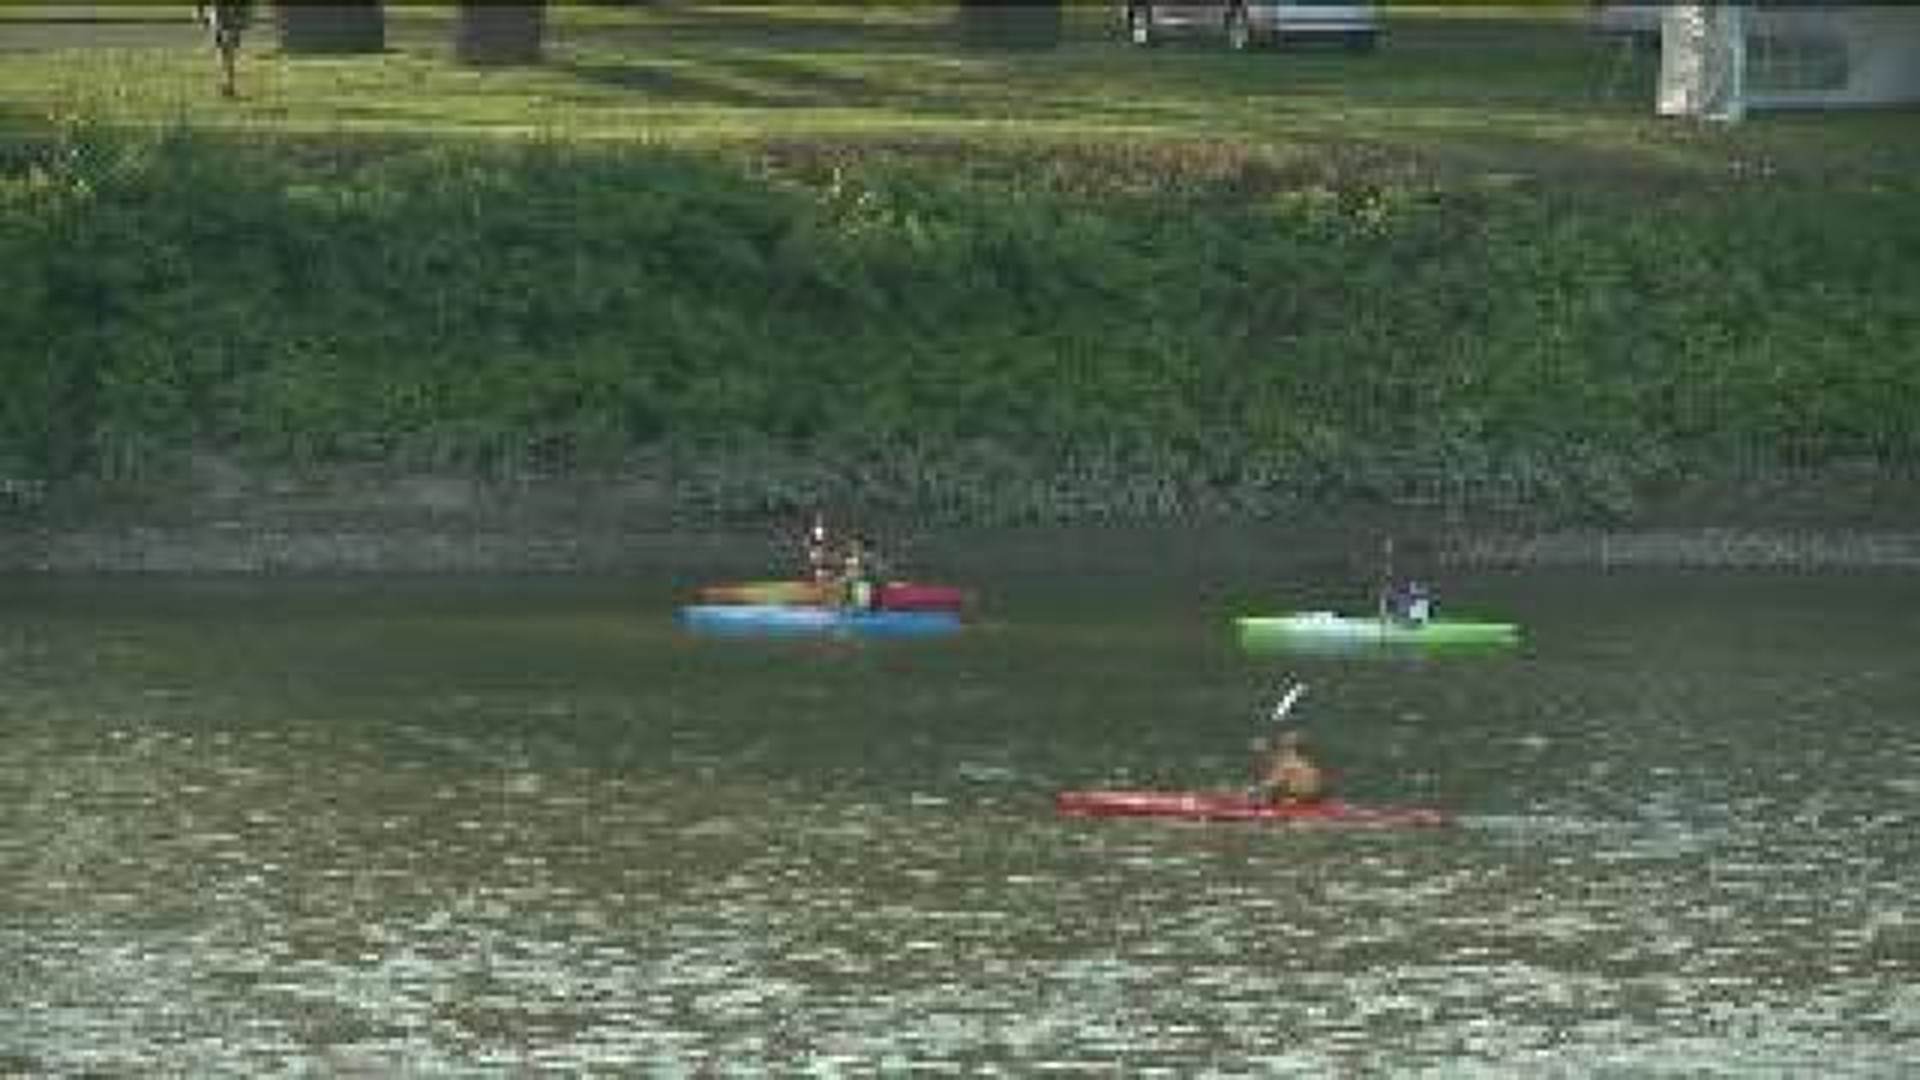 Wyoming Valley RiverFest 2014